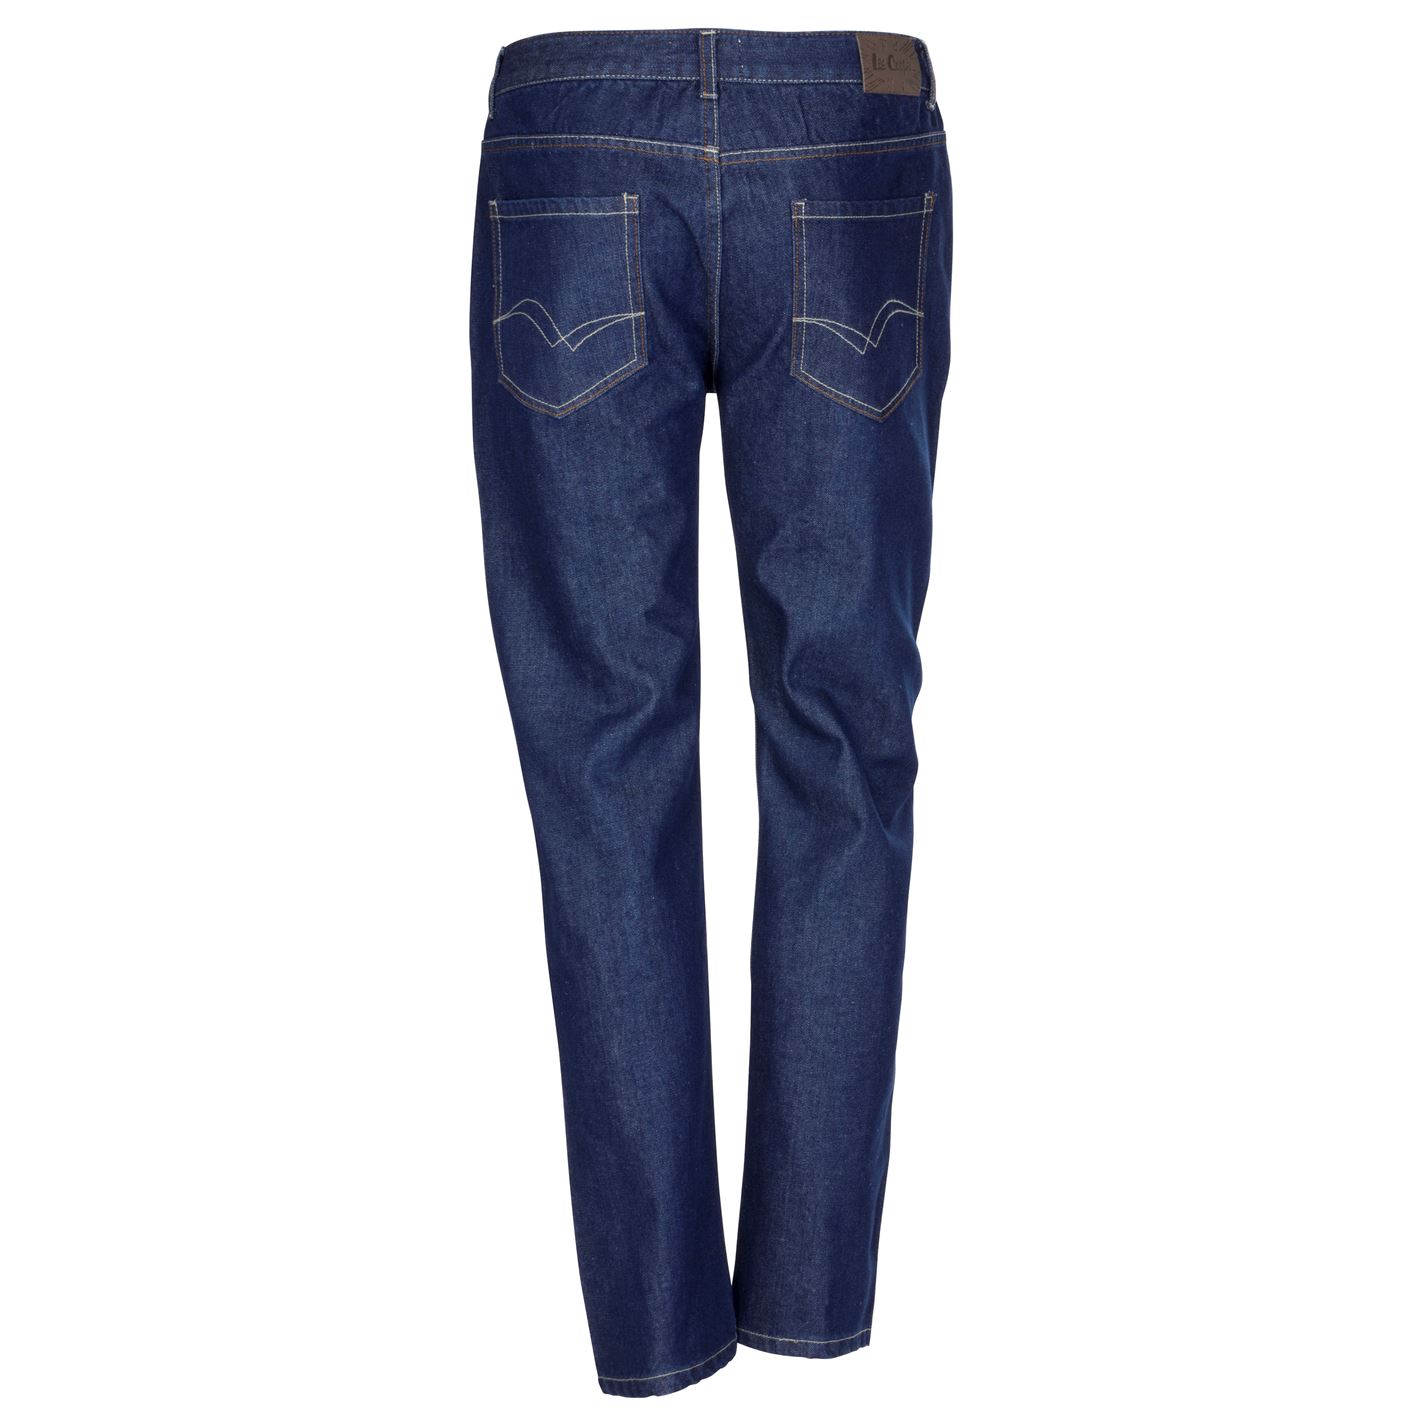 Lee Cooper Classic Regular Fit Jeans Mens Gents Straight Pants Trousers ...